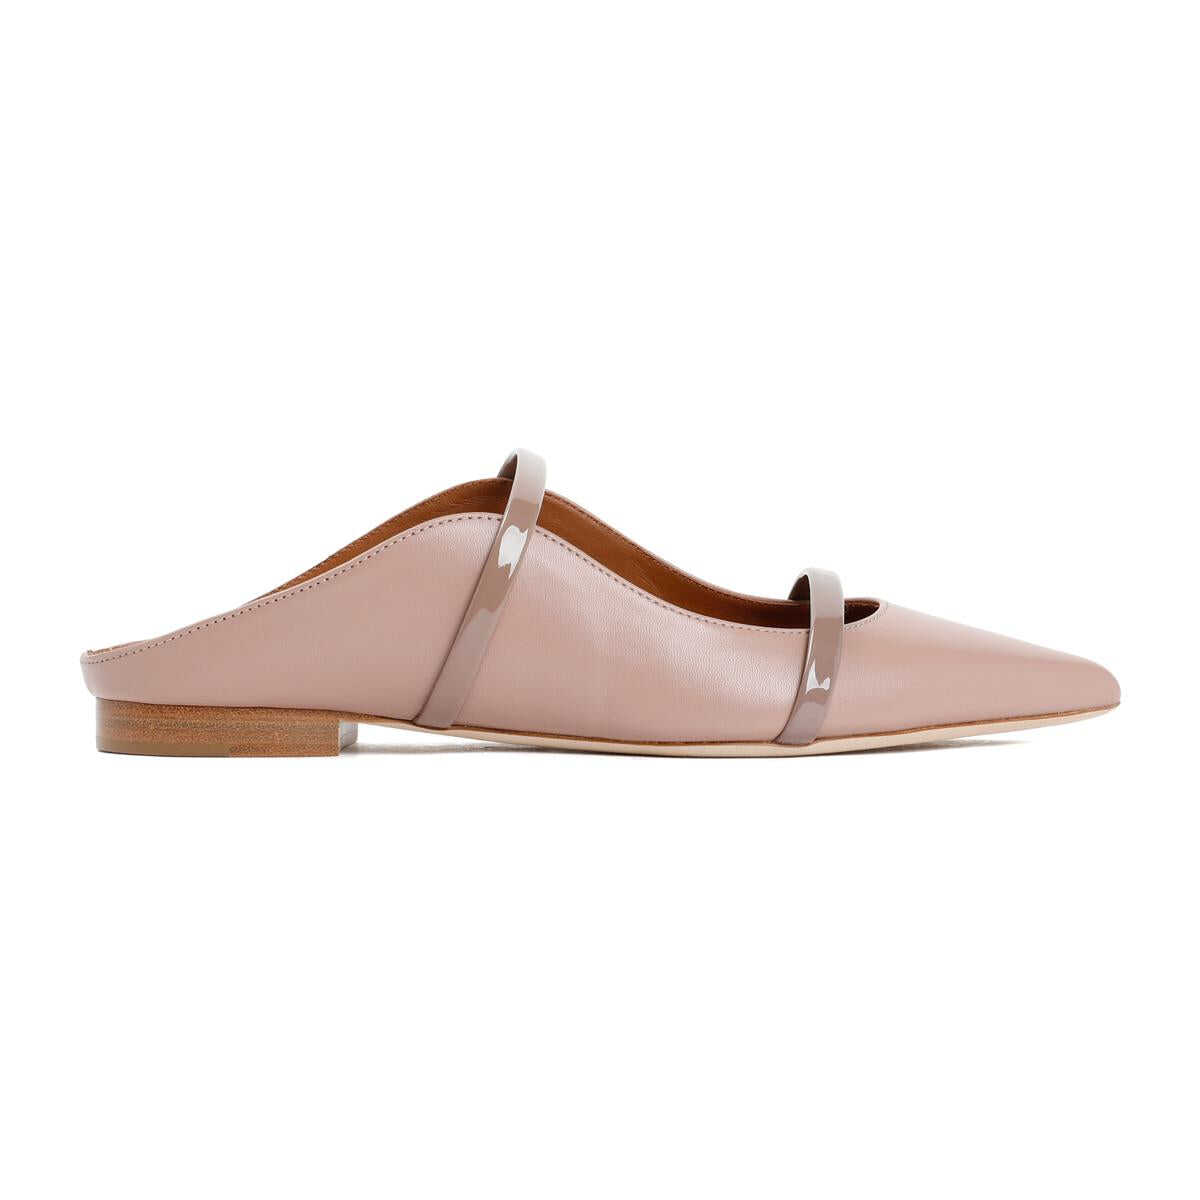 MALONE SOULIERS MALONE SOULIERS MAUREEN FLATS SHOES NUDE & NEUTRALS